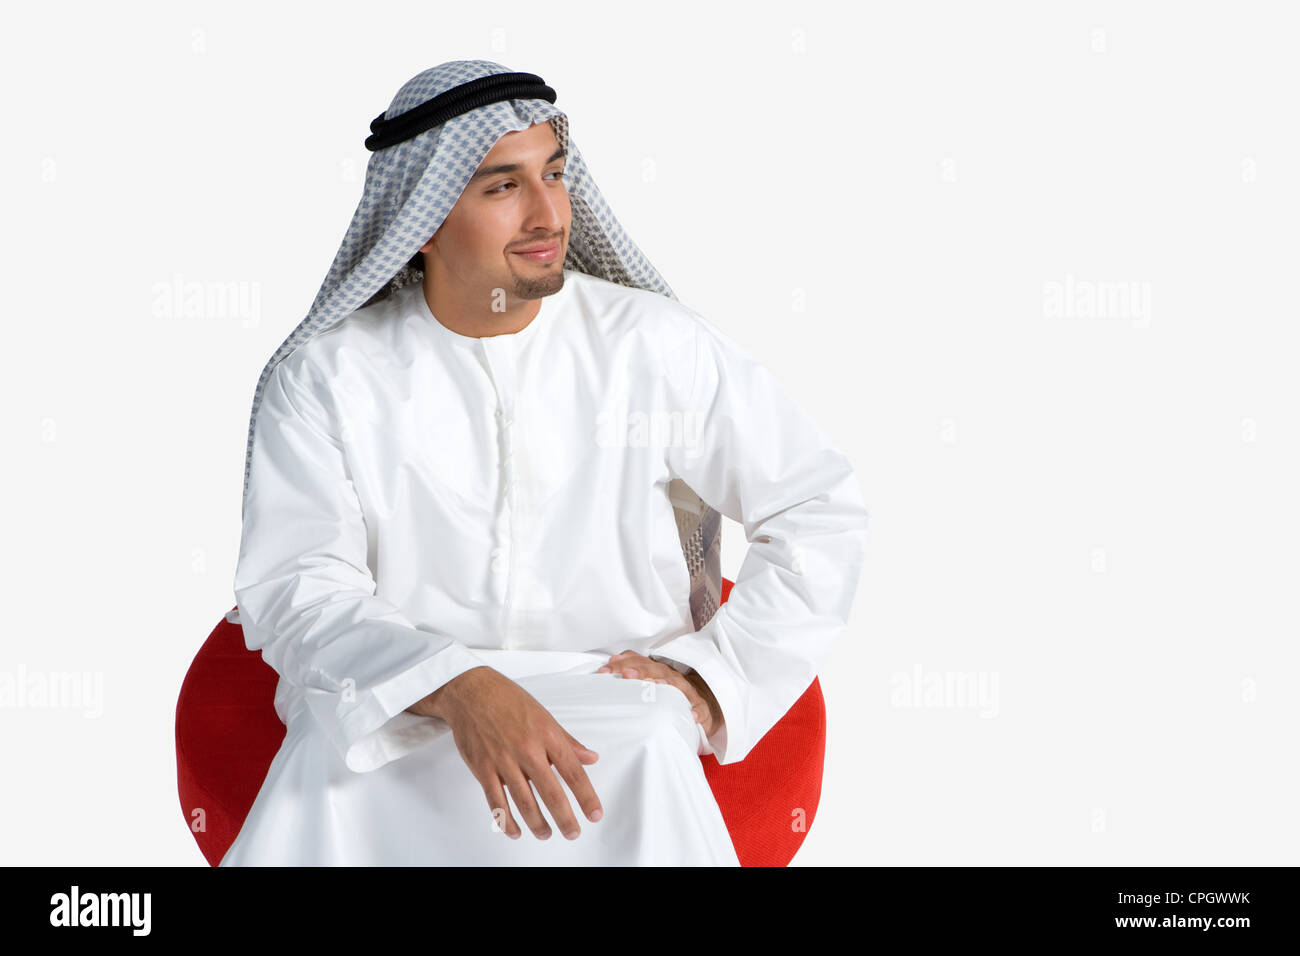 Young man sitting on chair, smiling Stock Photo